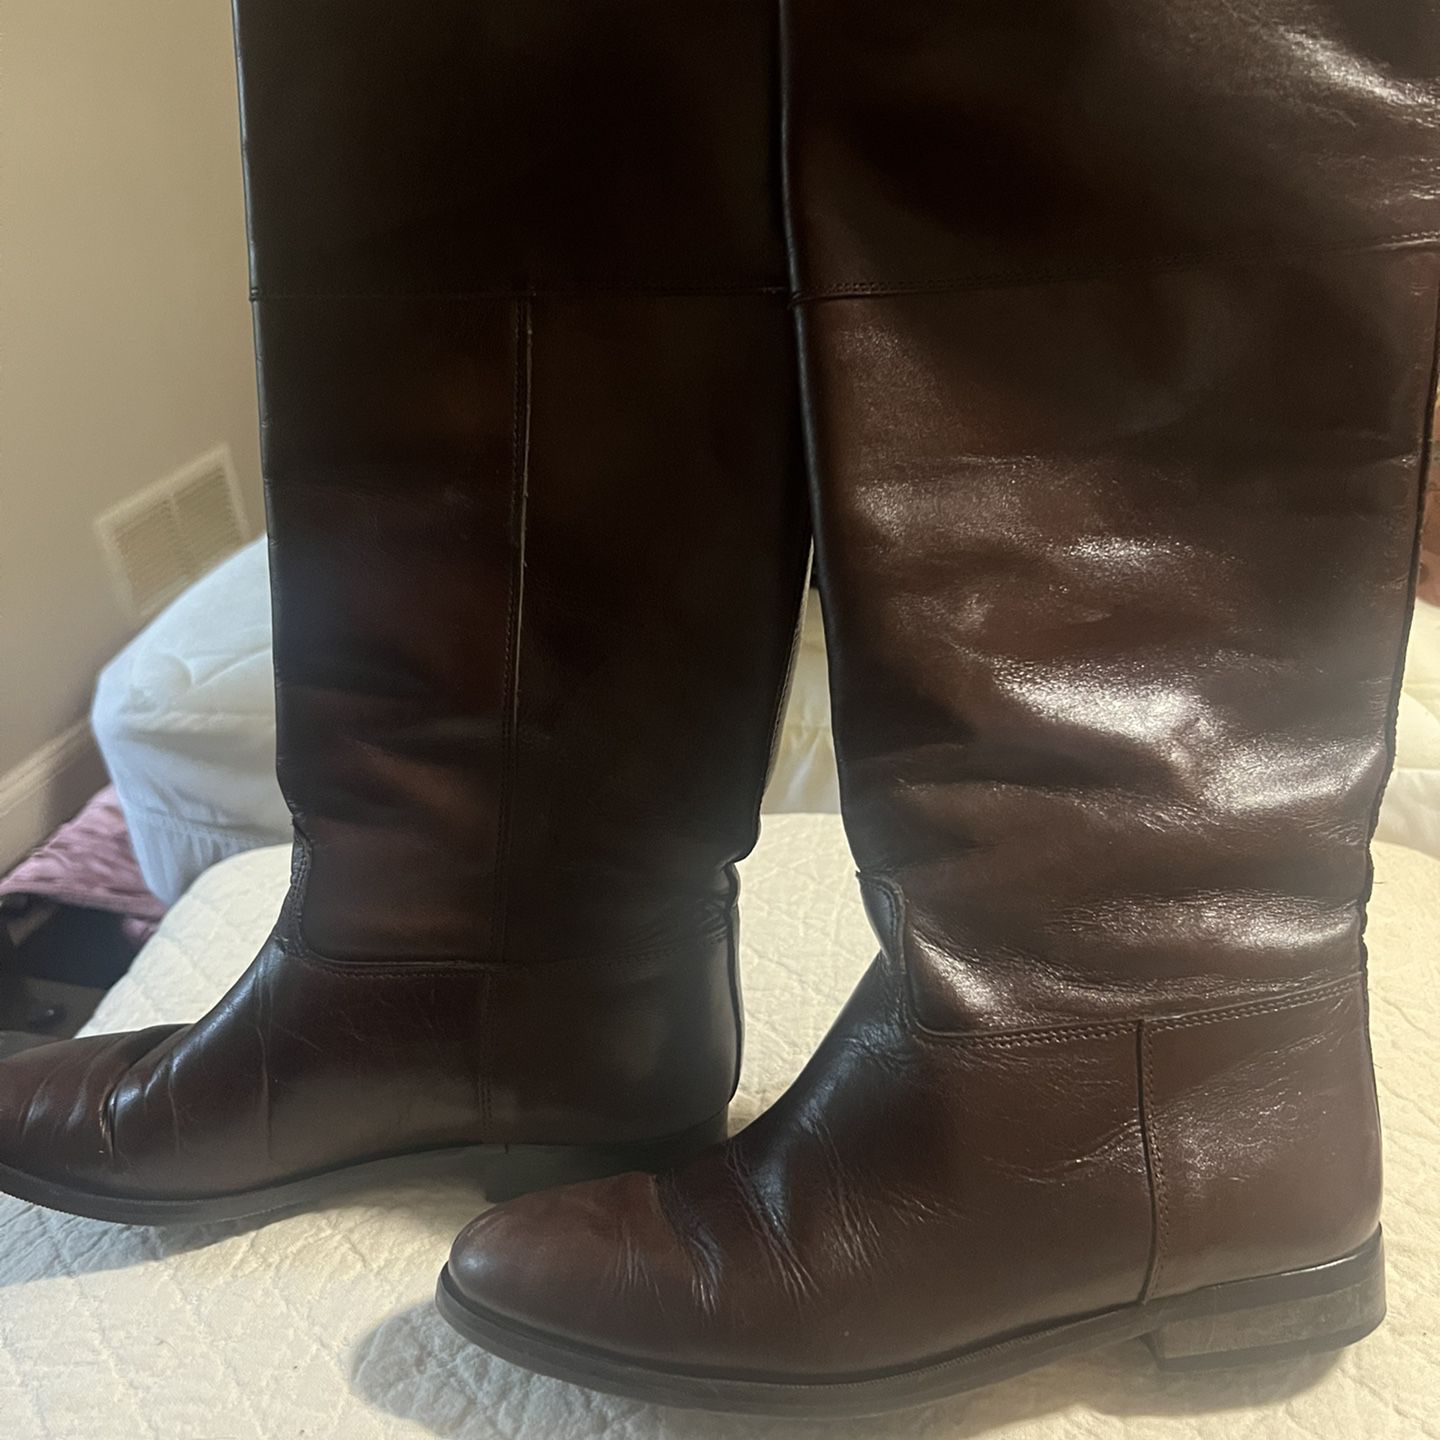 New Brown Boots, Maria Pia, Leather, In Box, 6.5